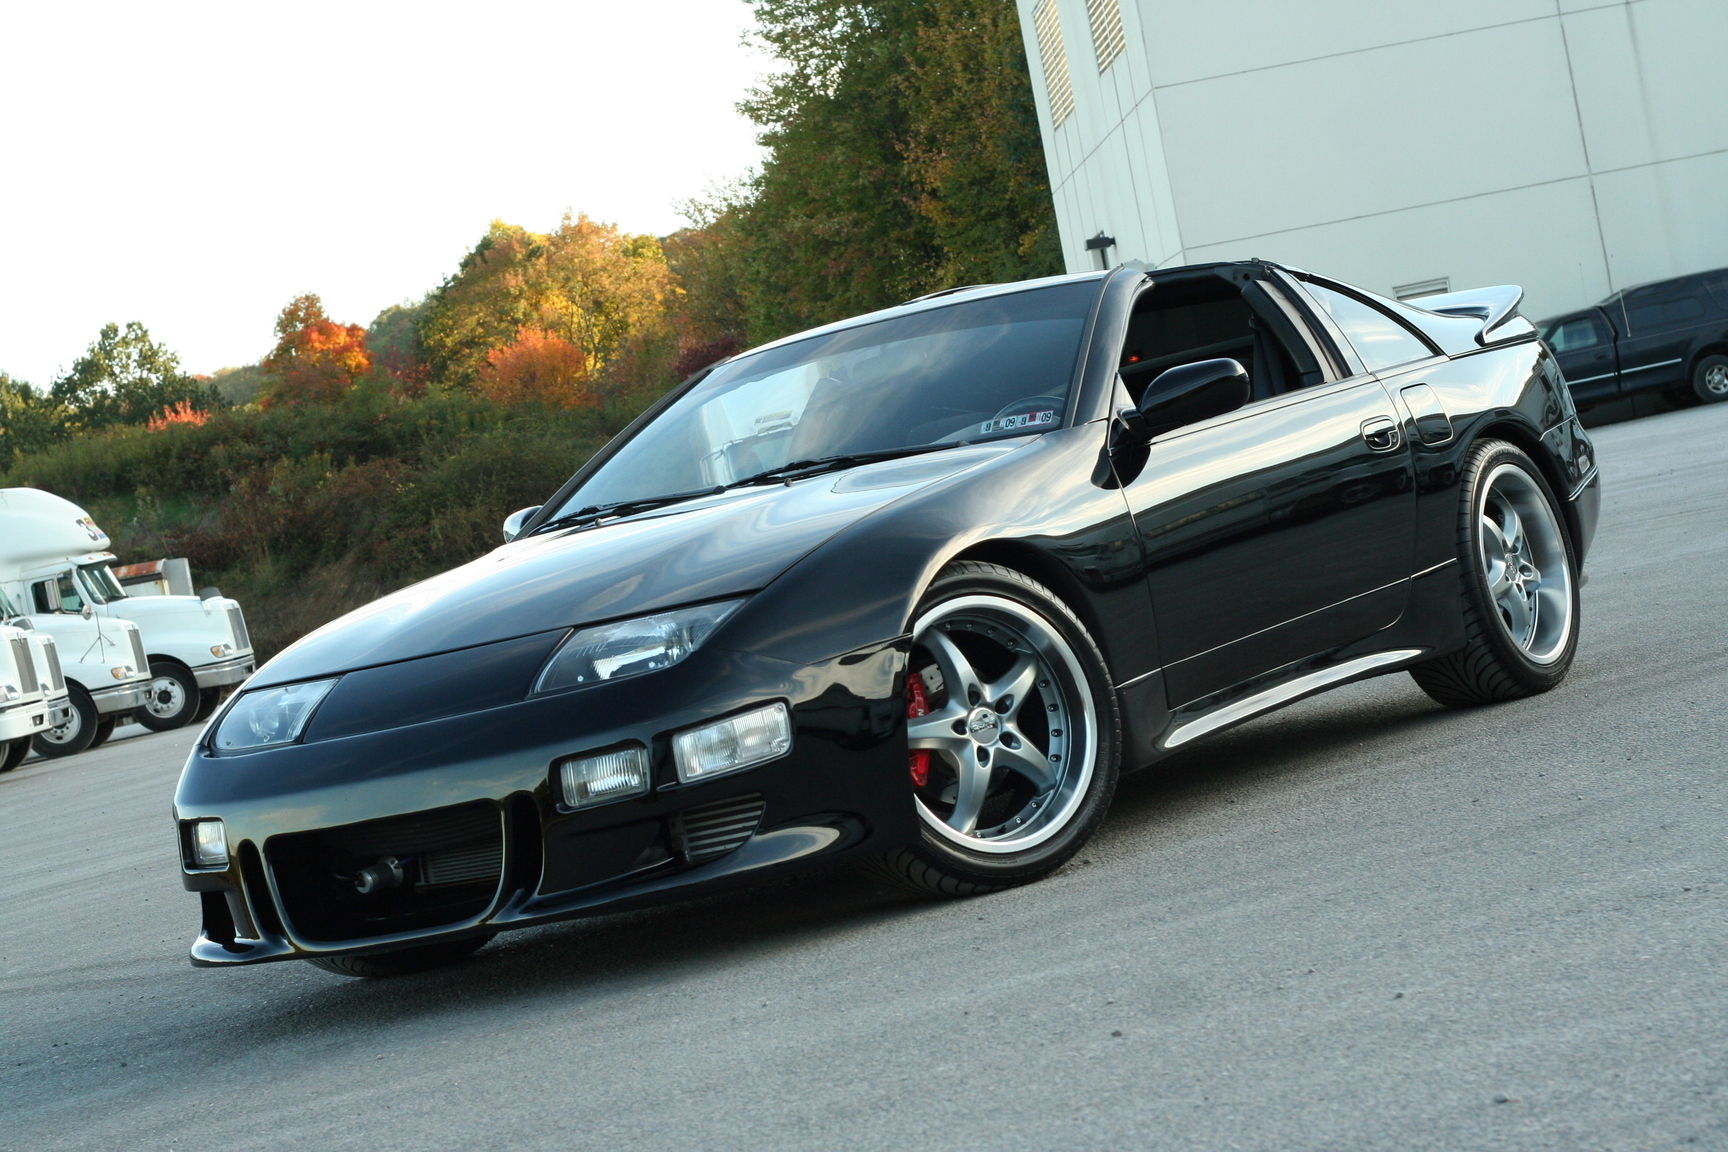 Nissan 300zx turbo review #4